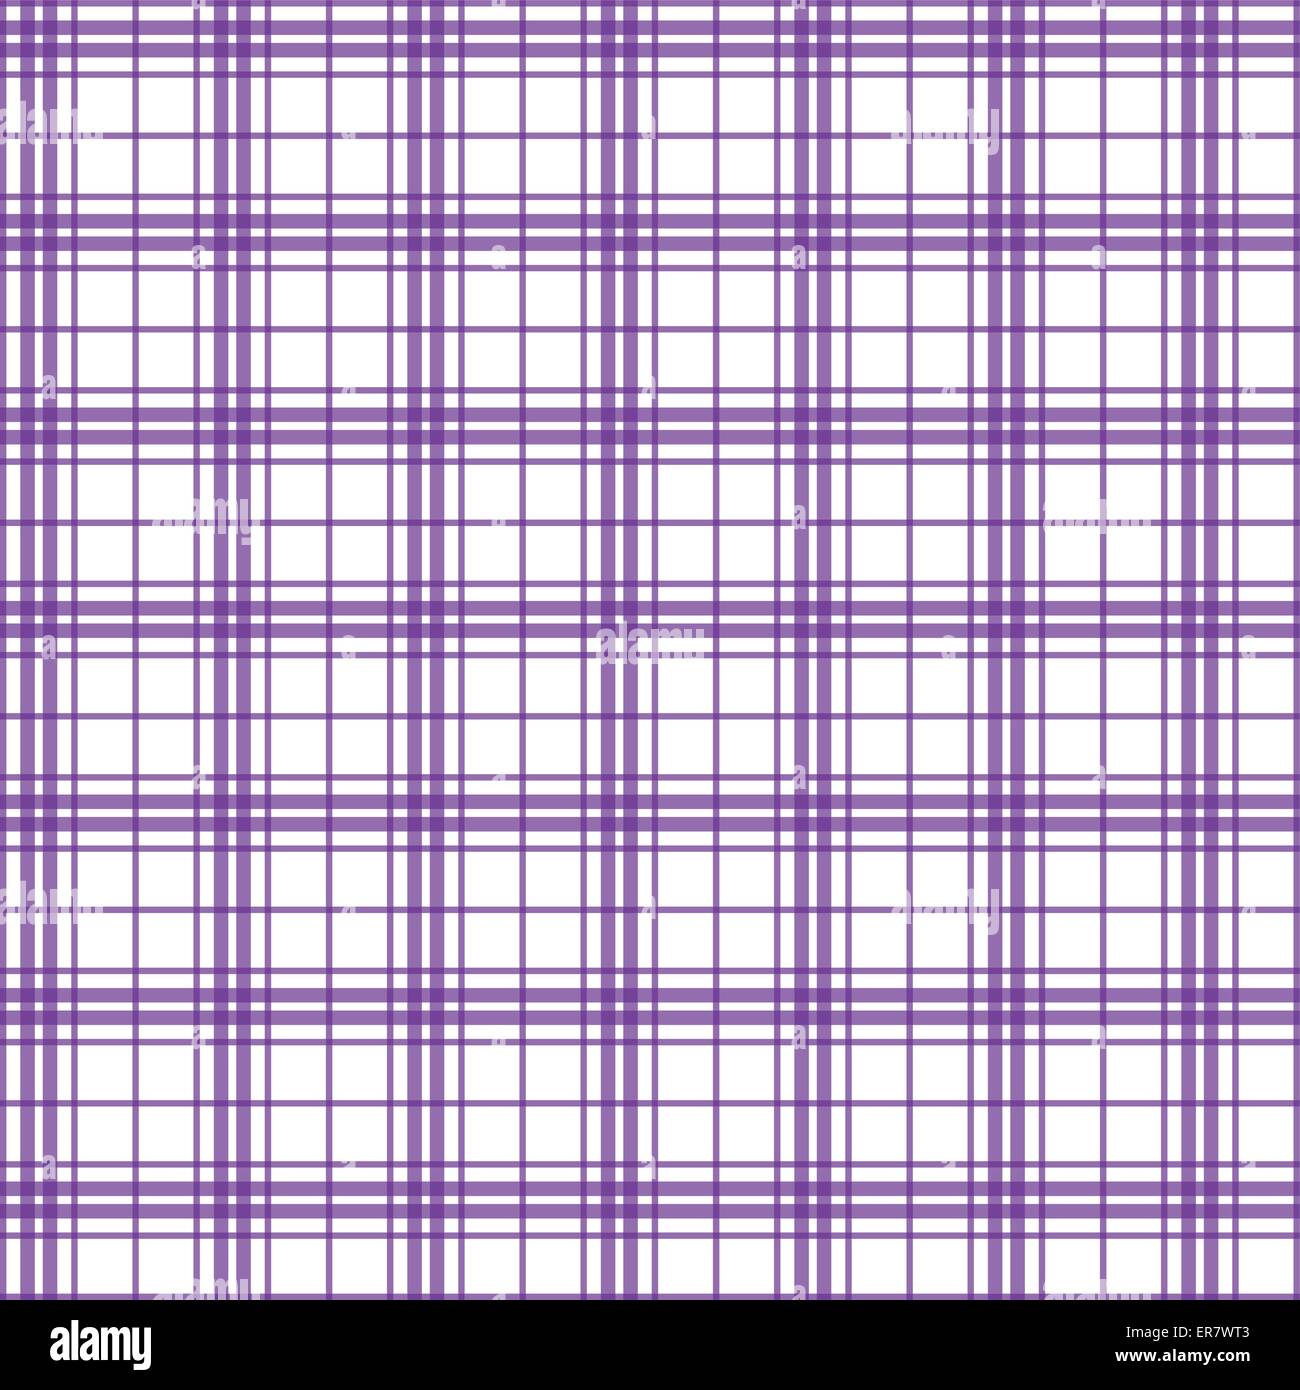 Vector illustration of purple plaid background concept Stock Vector